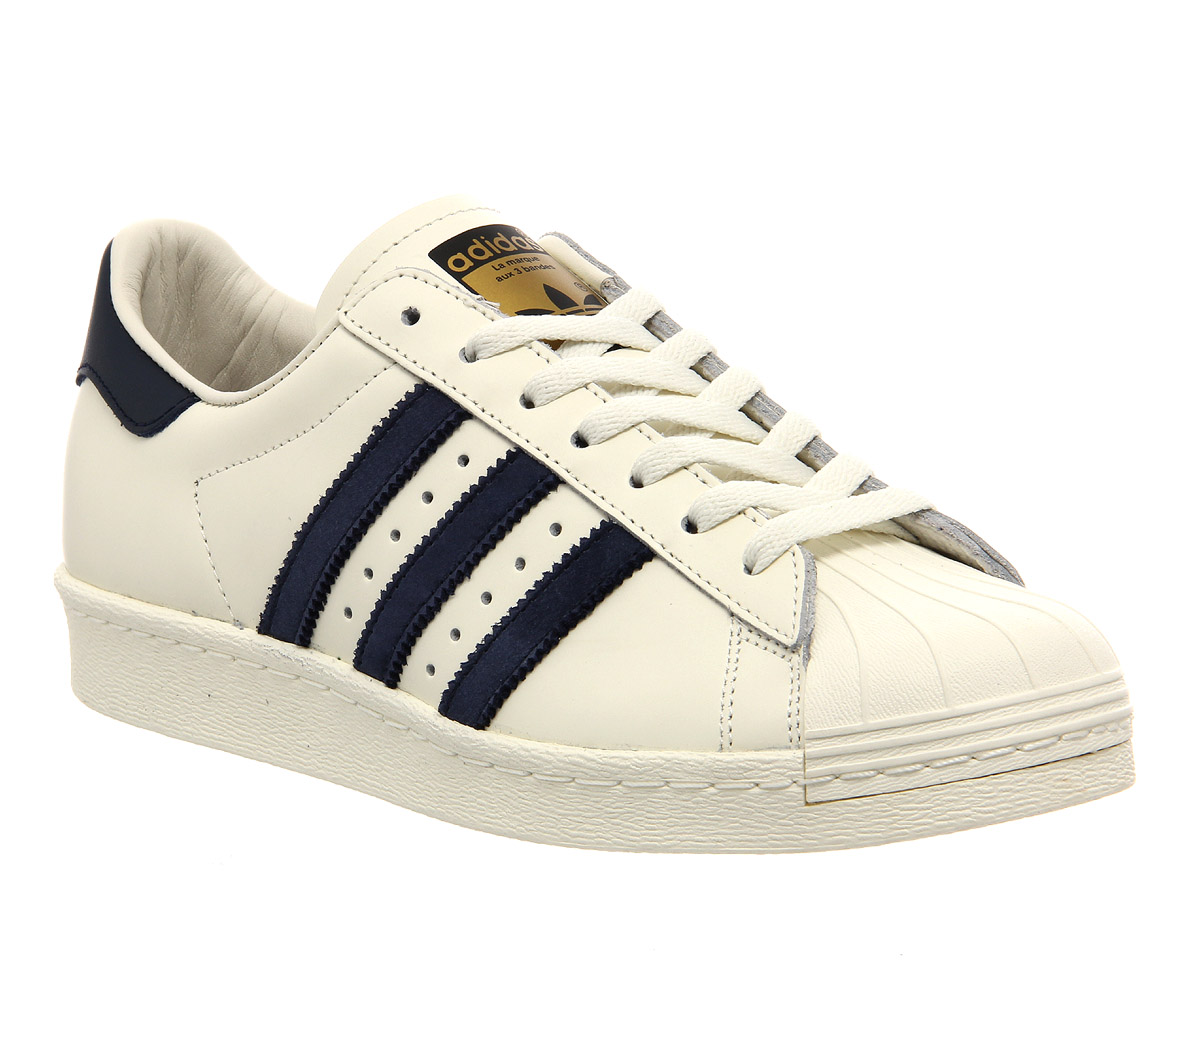 adidas Superstar 80s Dlx Vintage White Navy White - His trainers